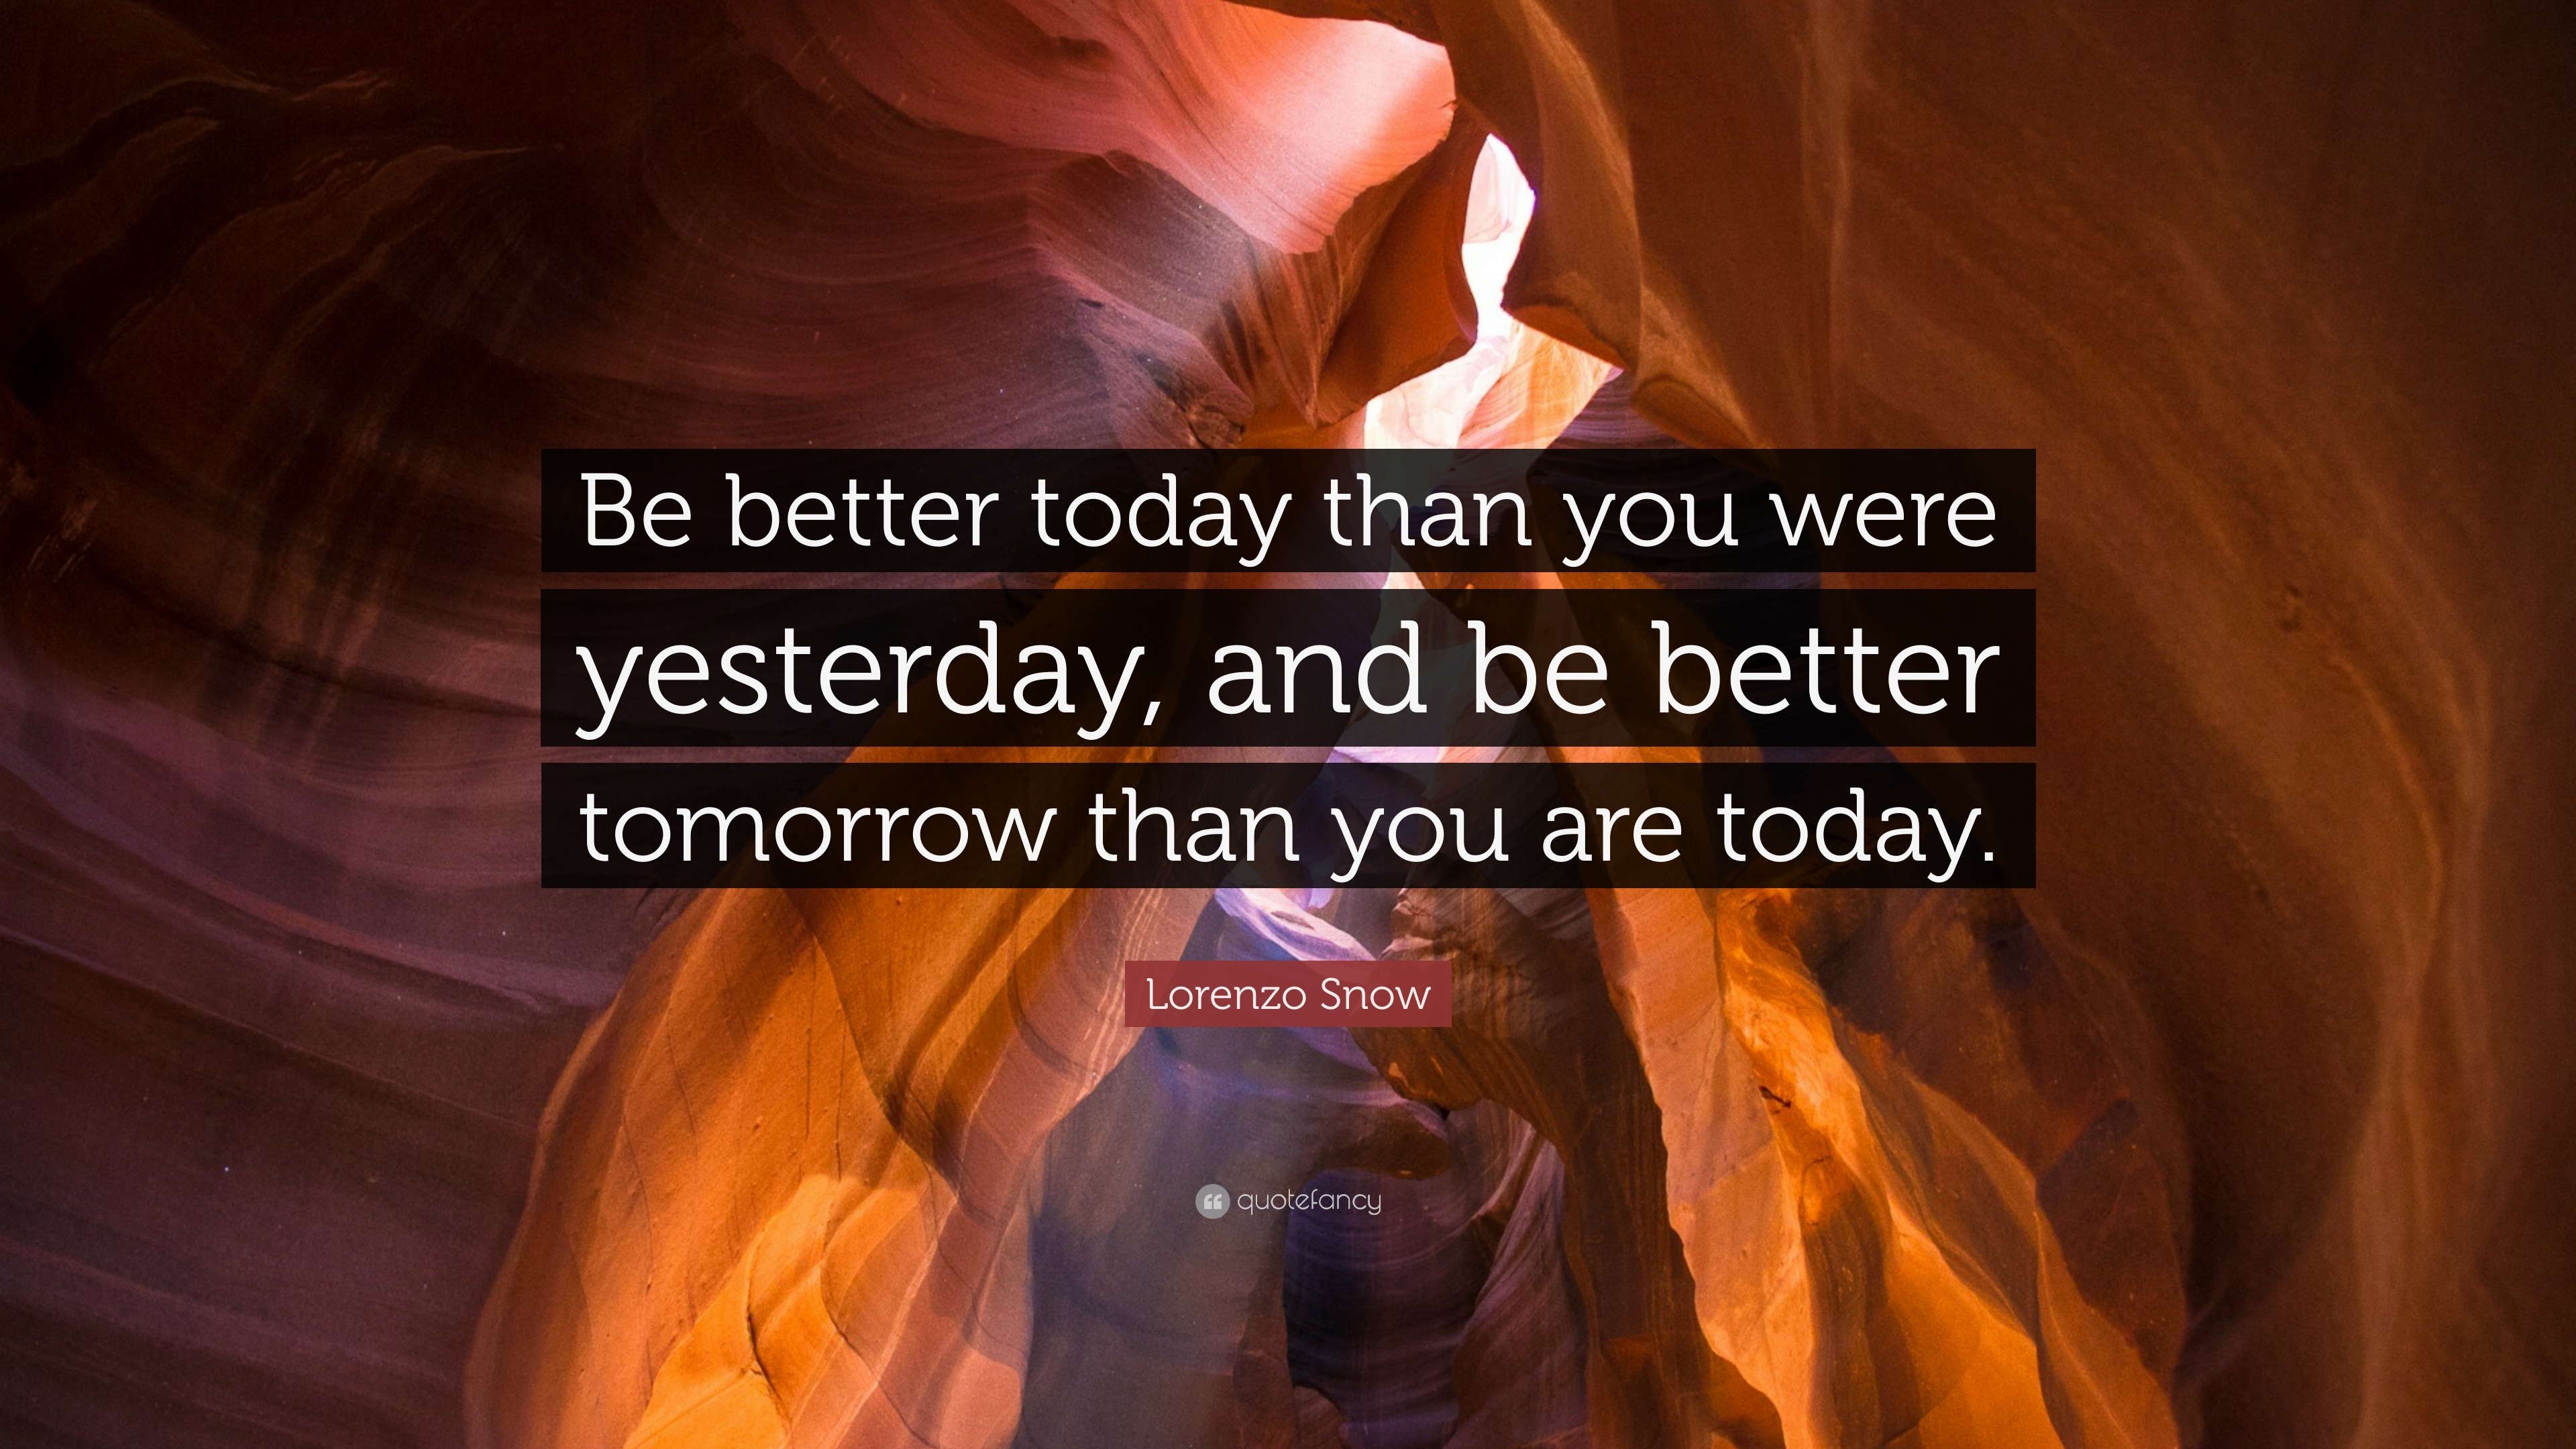 Lorenzo Snow Quote: "Be better today than you were yesterday, and be better tomorrow than you ...